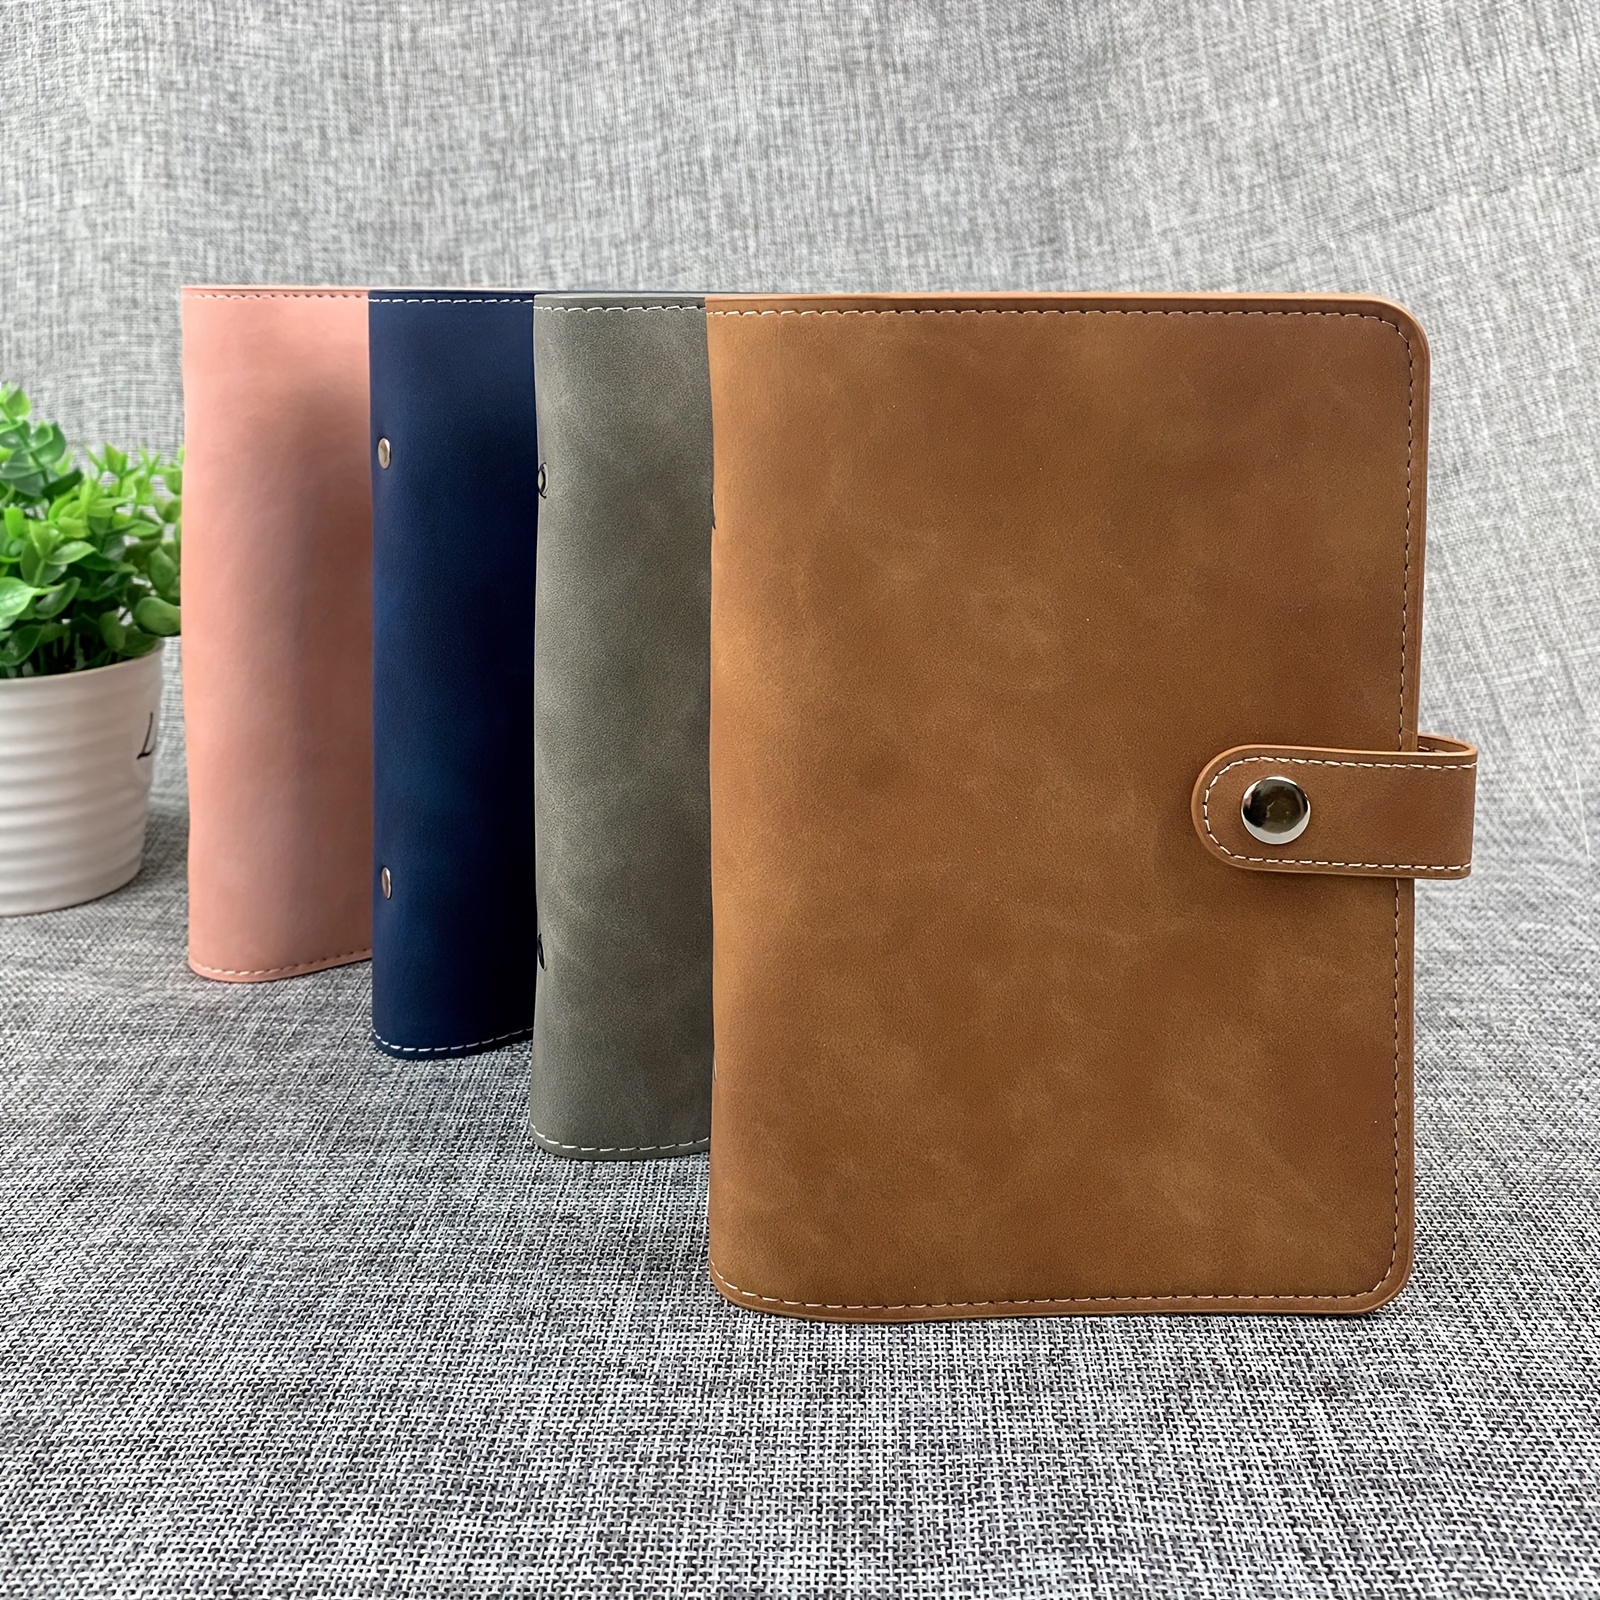  Leather Filofax Cover - A6 Leather Binder, Personal Size  Leather Planner Filofax Personal Size Planner Cover Leather Planner Agenda  A6 Size Leather Planner Binder : Handmade Products